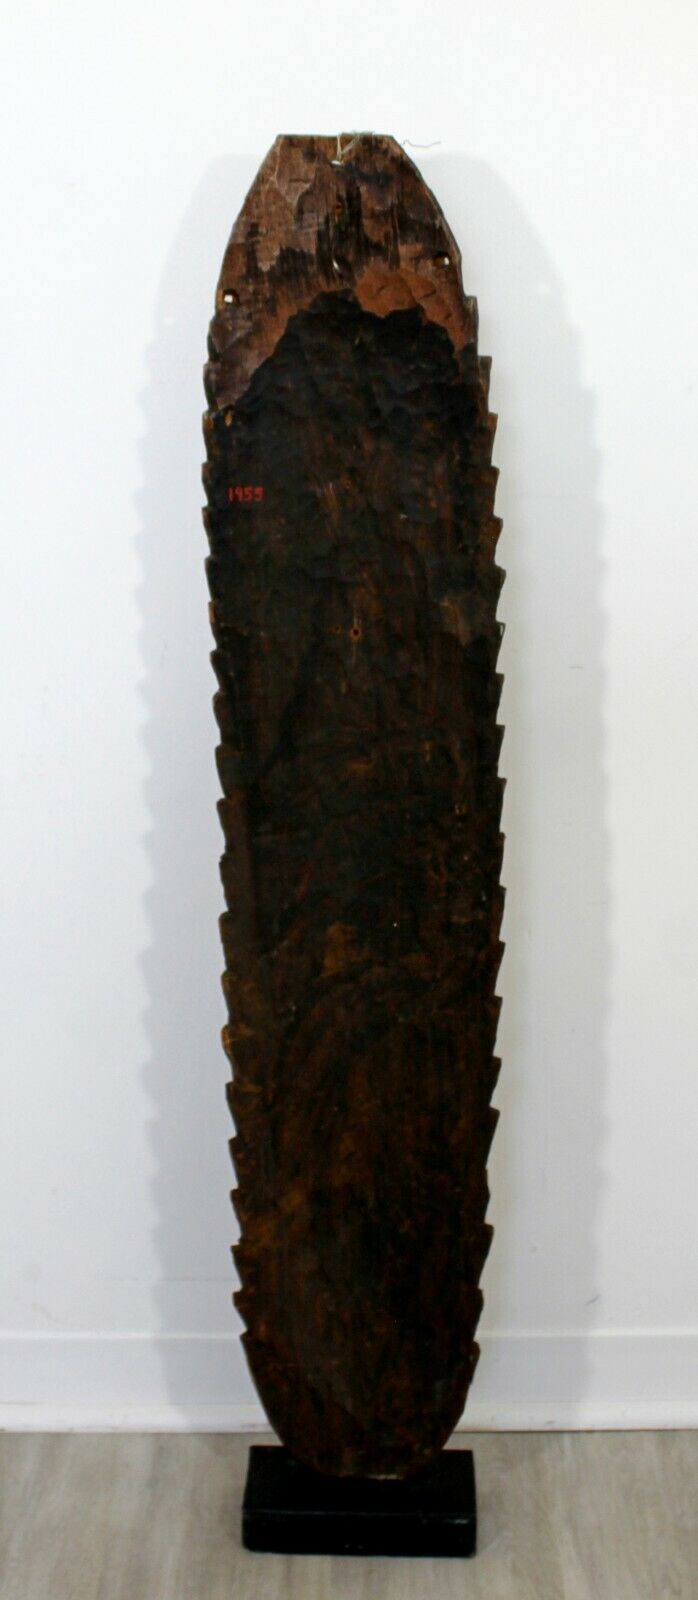 Antique Papua New Guinea Carved Wood Triple Mask Shield 1950s